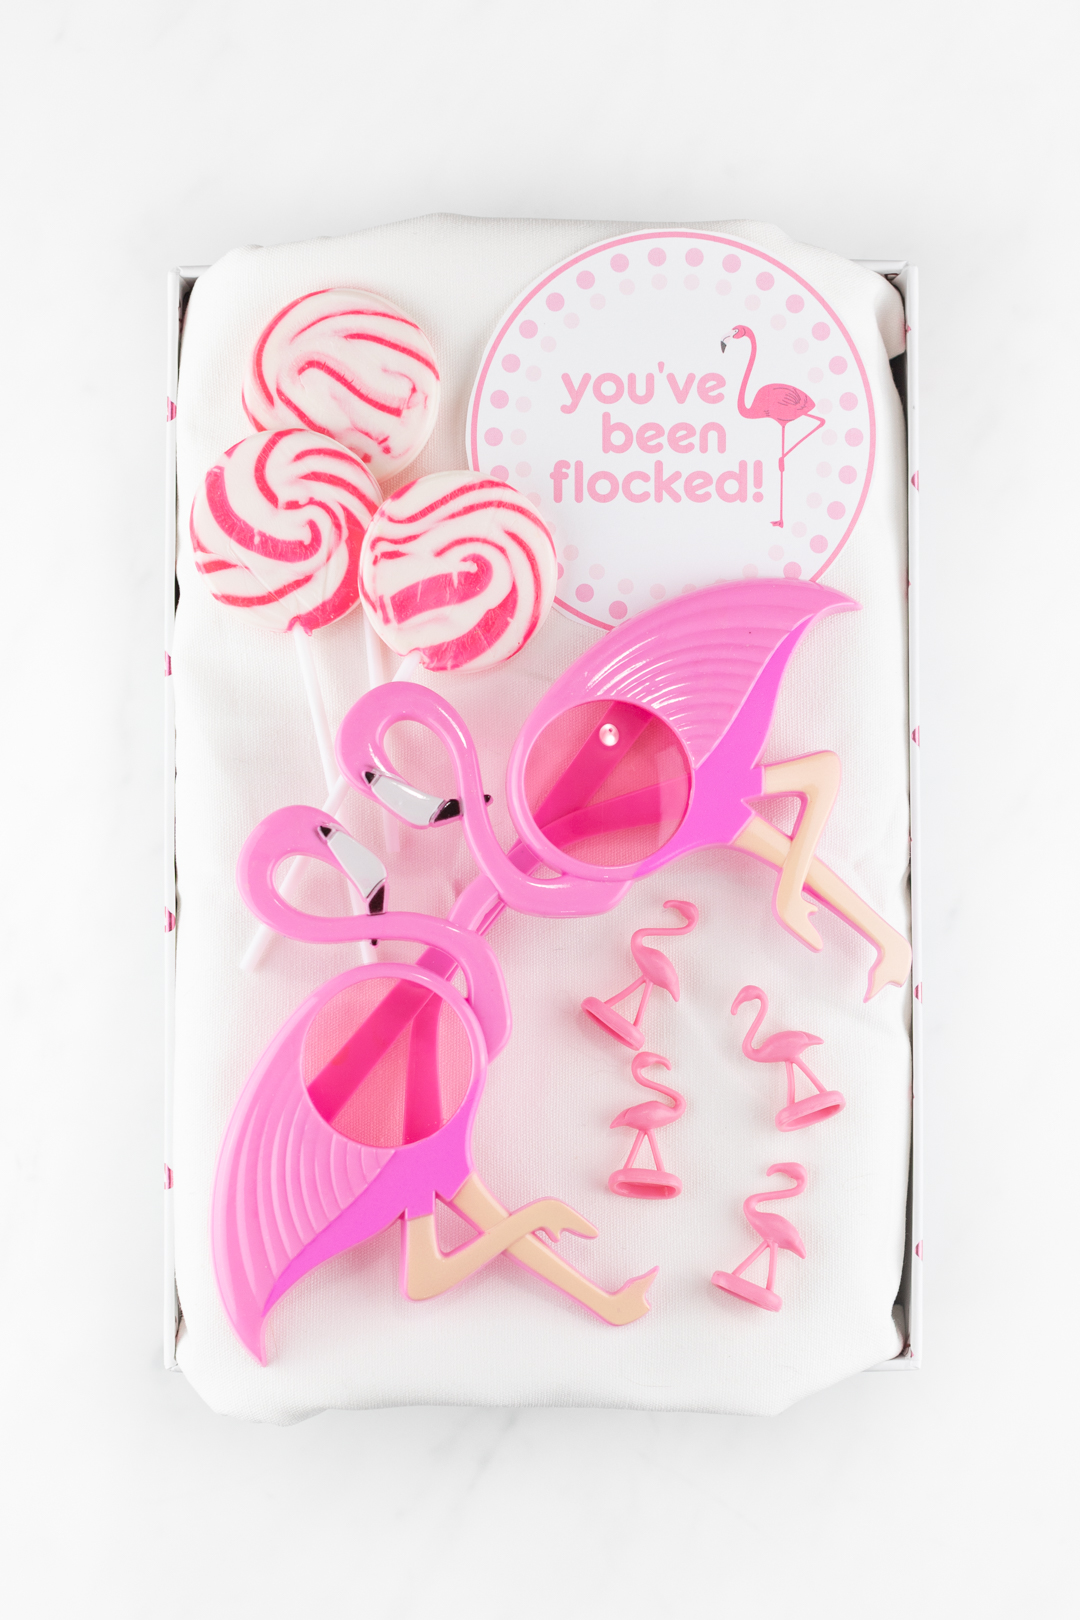 unique-you-ve-been-flocked-ideas-cutefetti